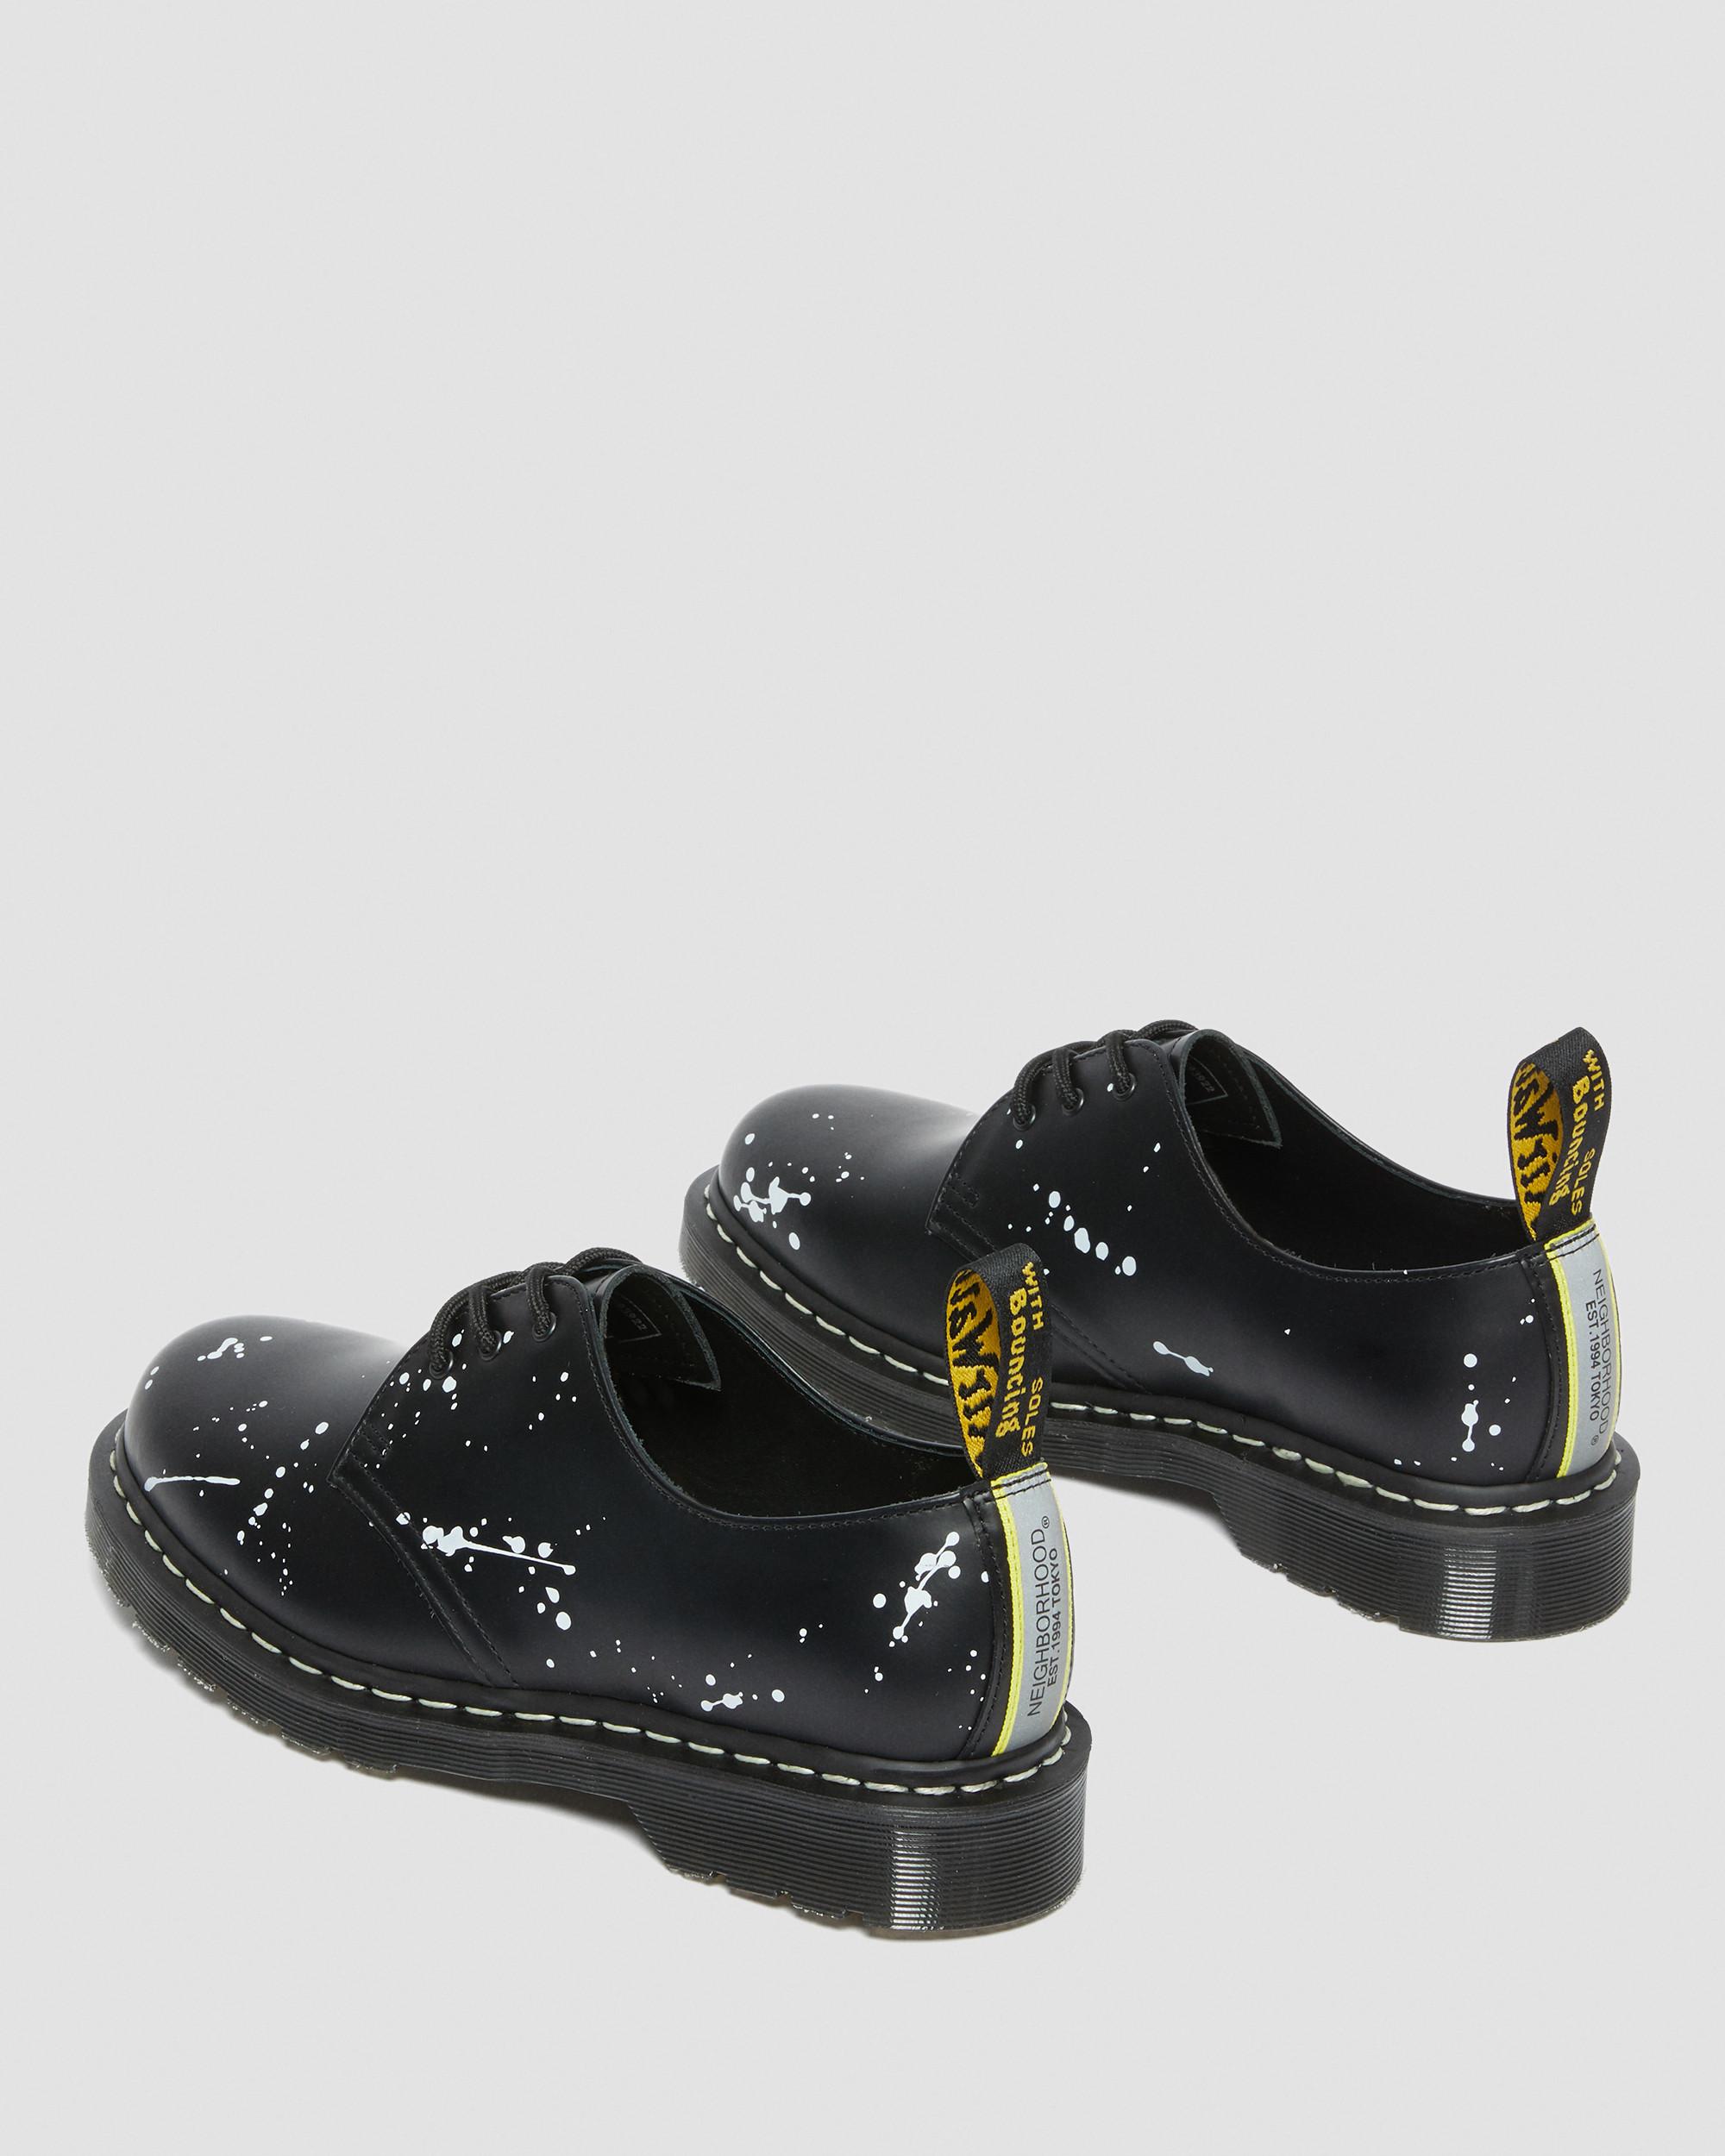 1461 Neighborhood Smooth Leather Oxford Shoes | Dr. Martens